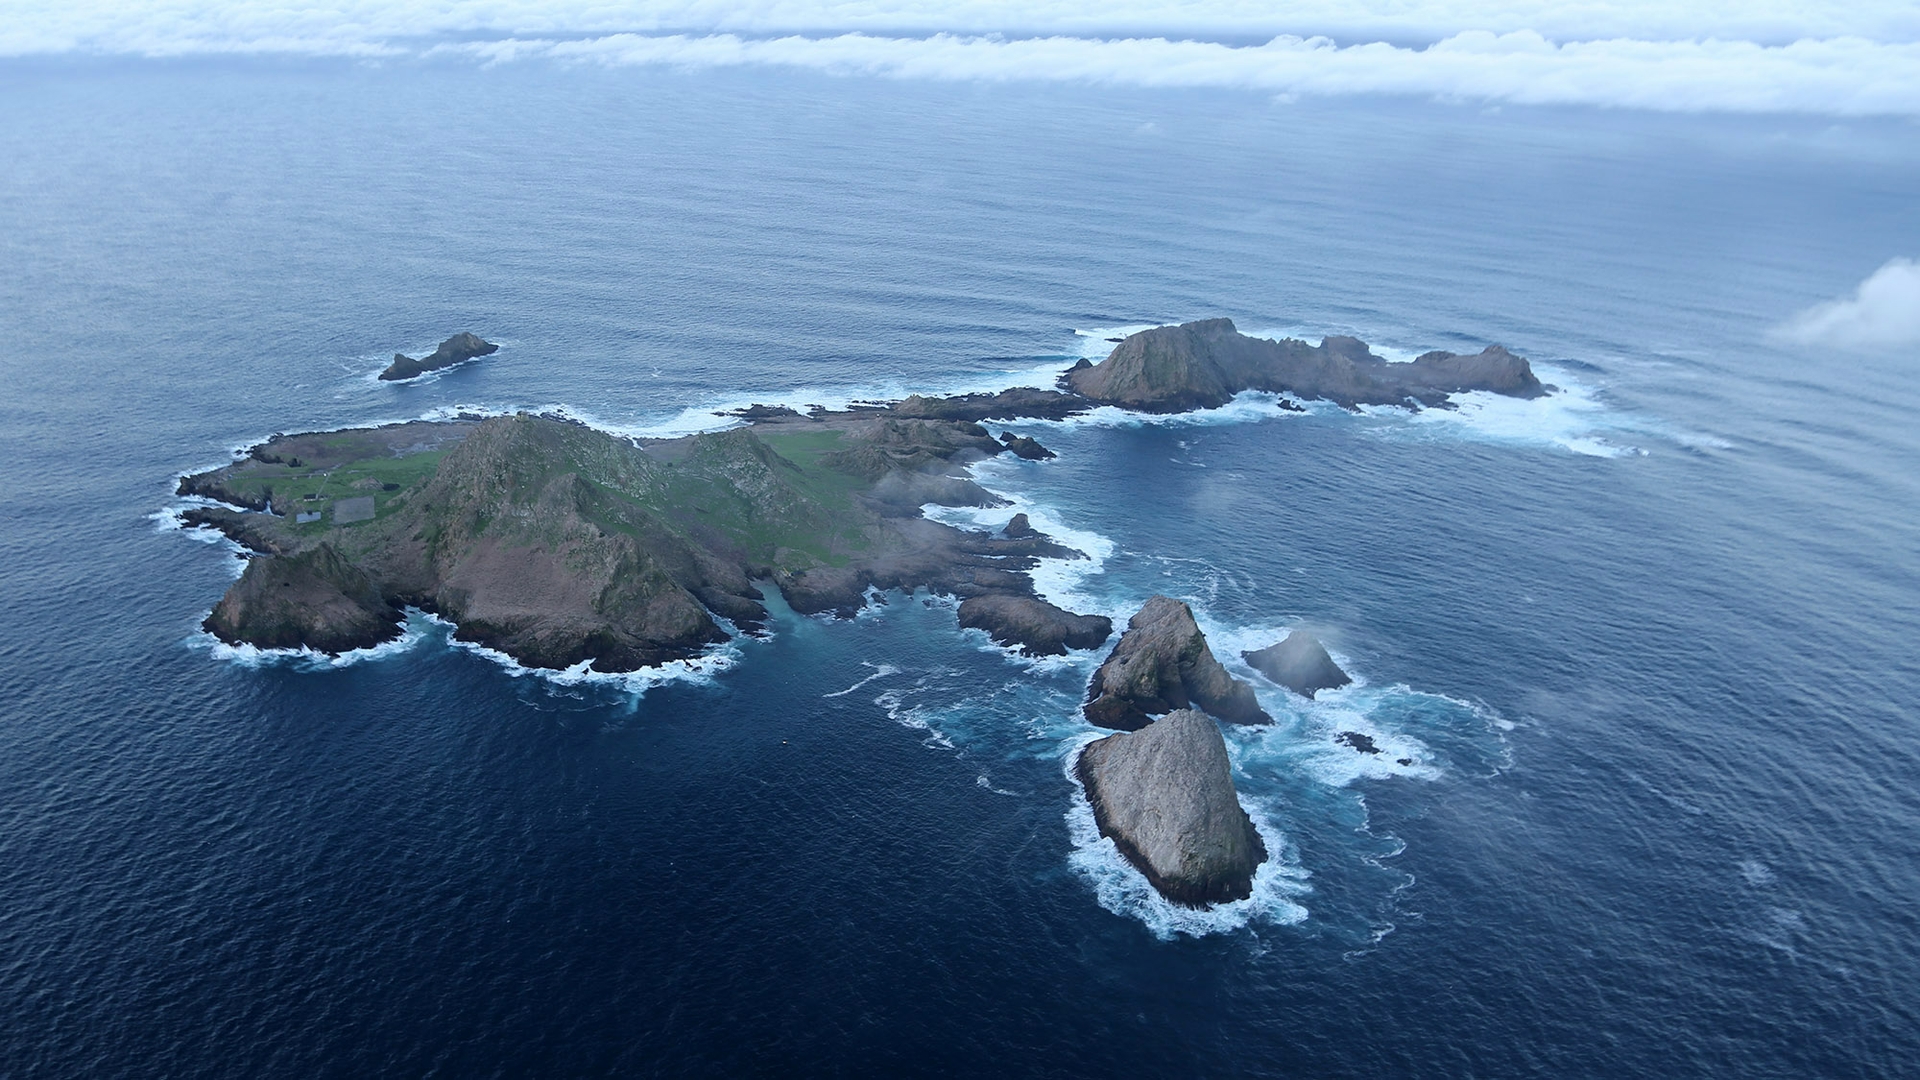 Aerial image of Southeast Farallon Island; the rocky main island of the Farallon Islands surrounded by blue water with clouds on the horizon.